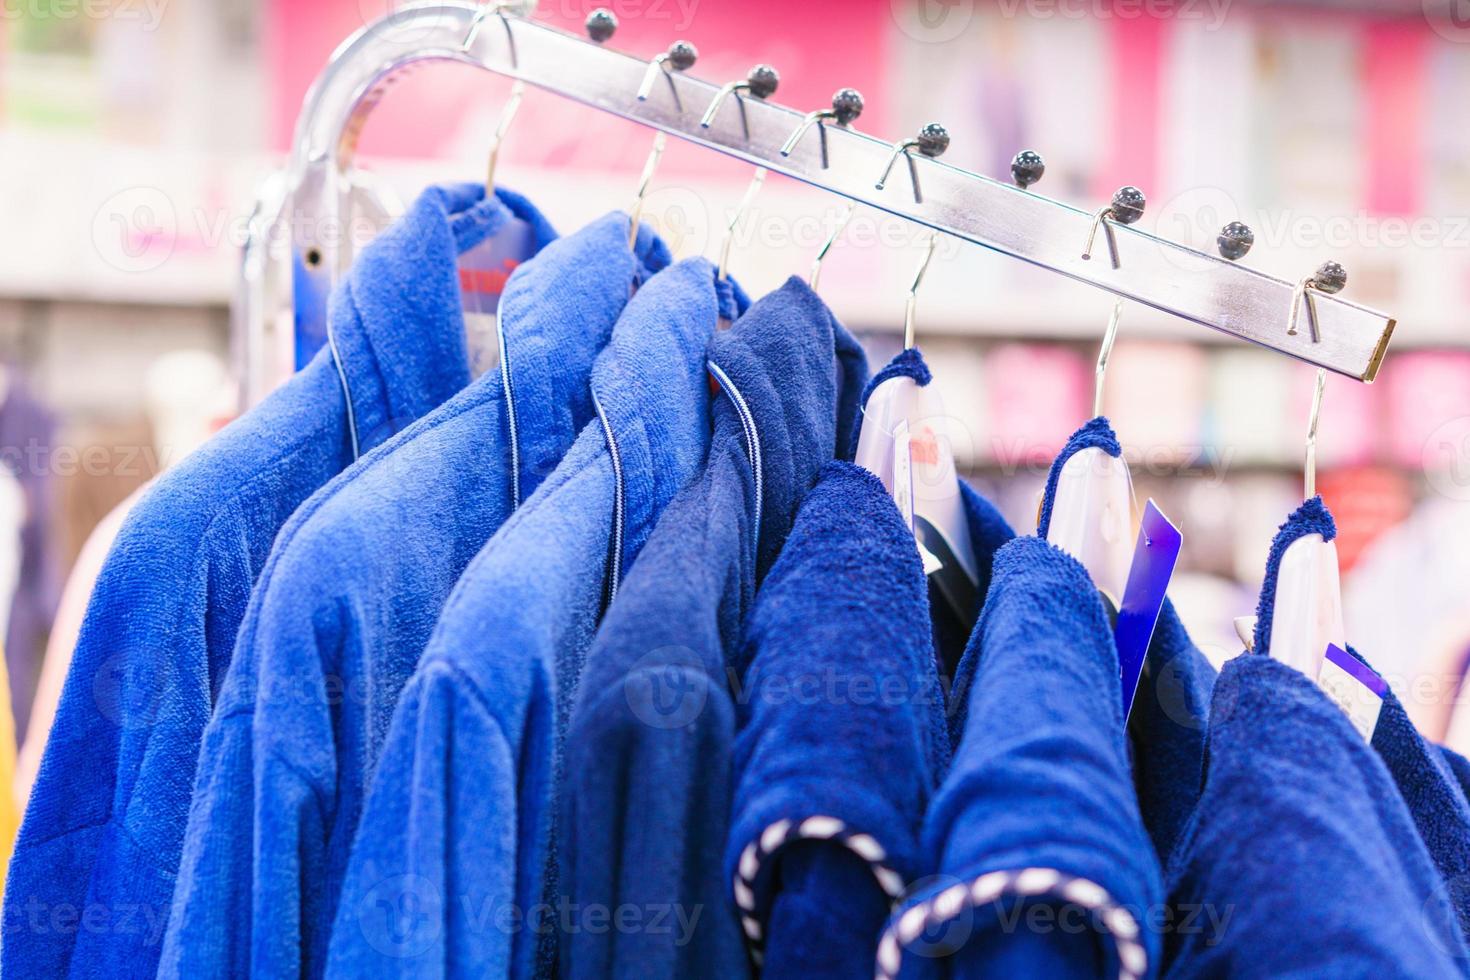 Blue terry bathrobes hang on coat hangers in a store, close-up selective focus. photo